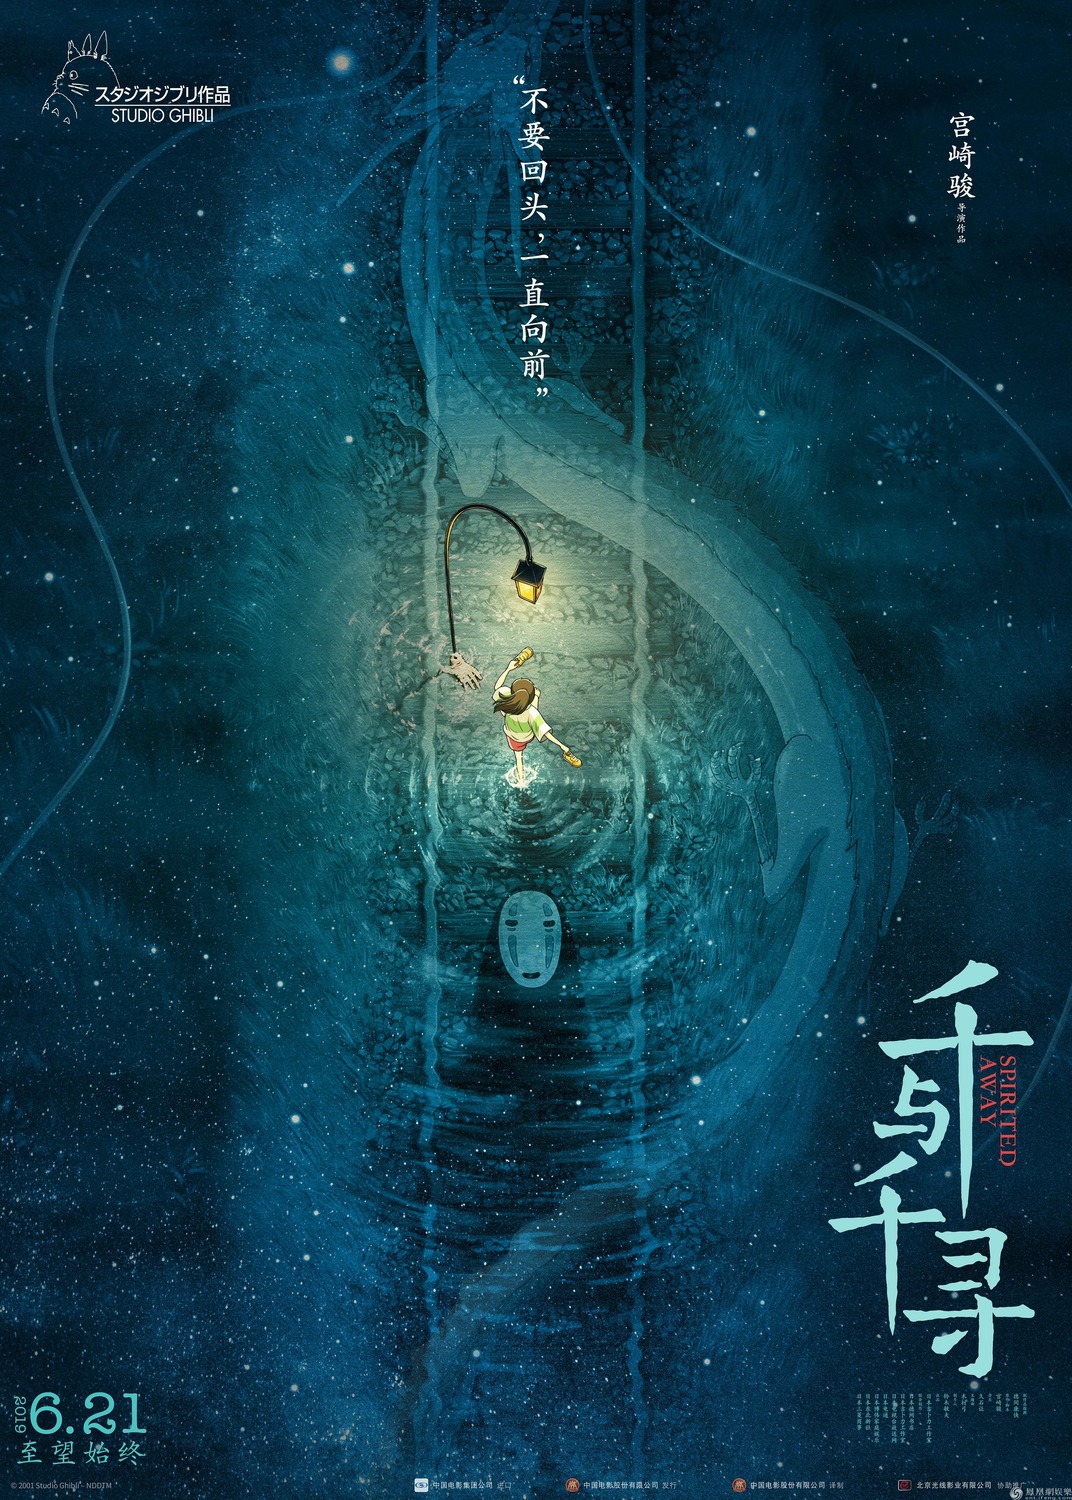 Extra Large Movie Poster Image for Spirited Away (#7 of 7)